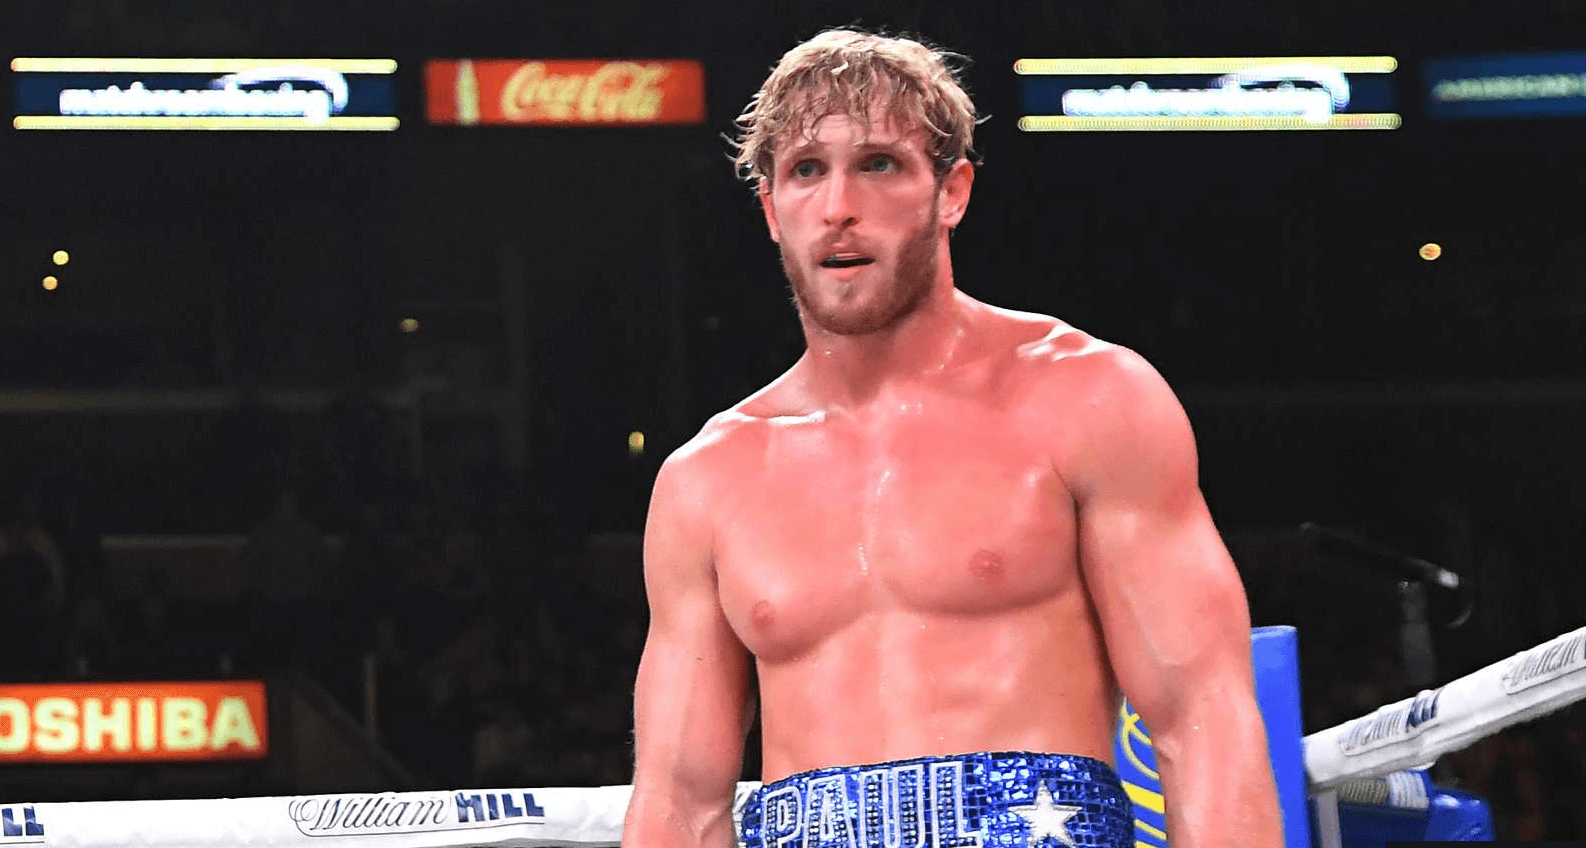 Logan Paul believes Nate Diaz is ducking their boxing match